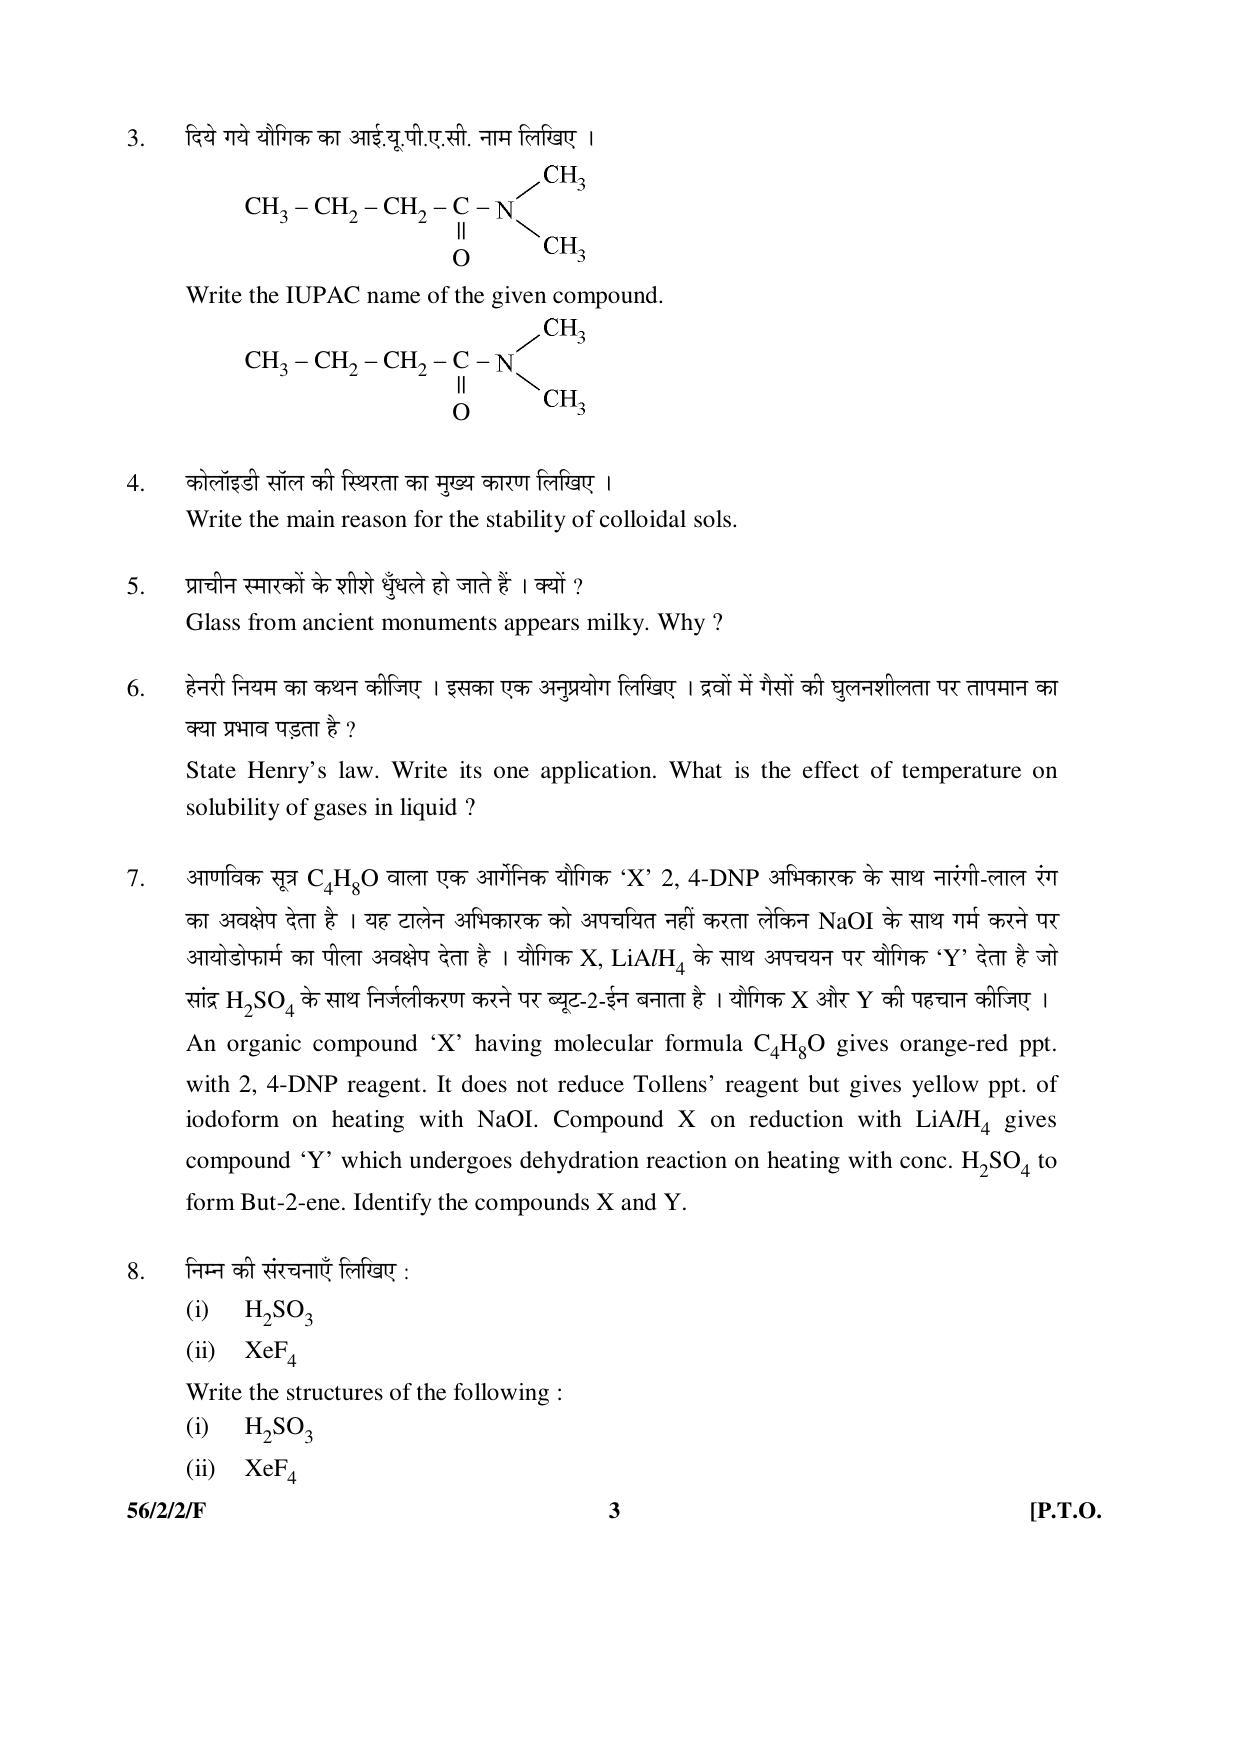 CBSE Class 12 56-2-2-F _Chemistry_ 2016 Question Paper - Page 3